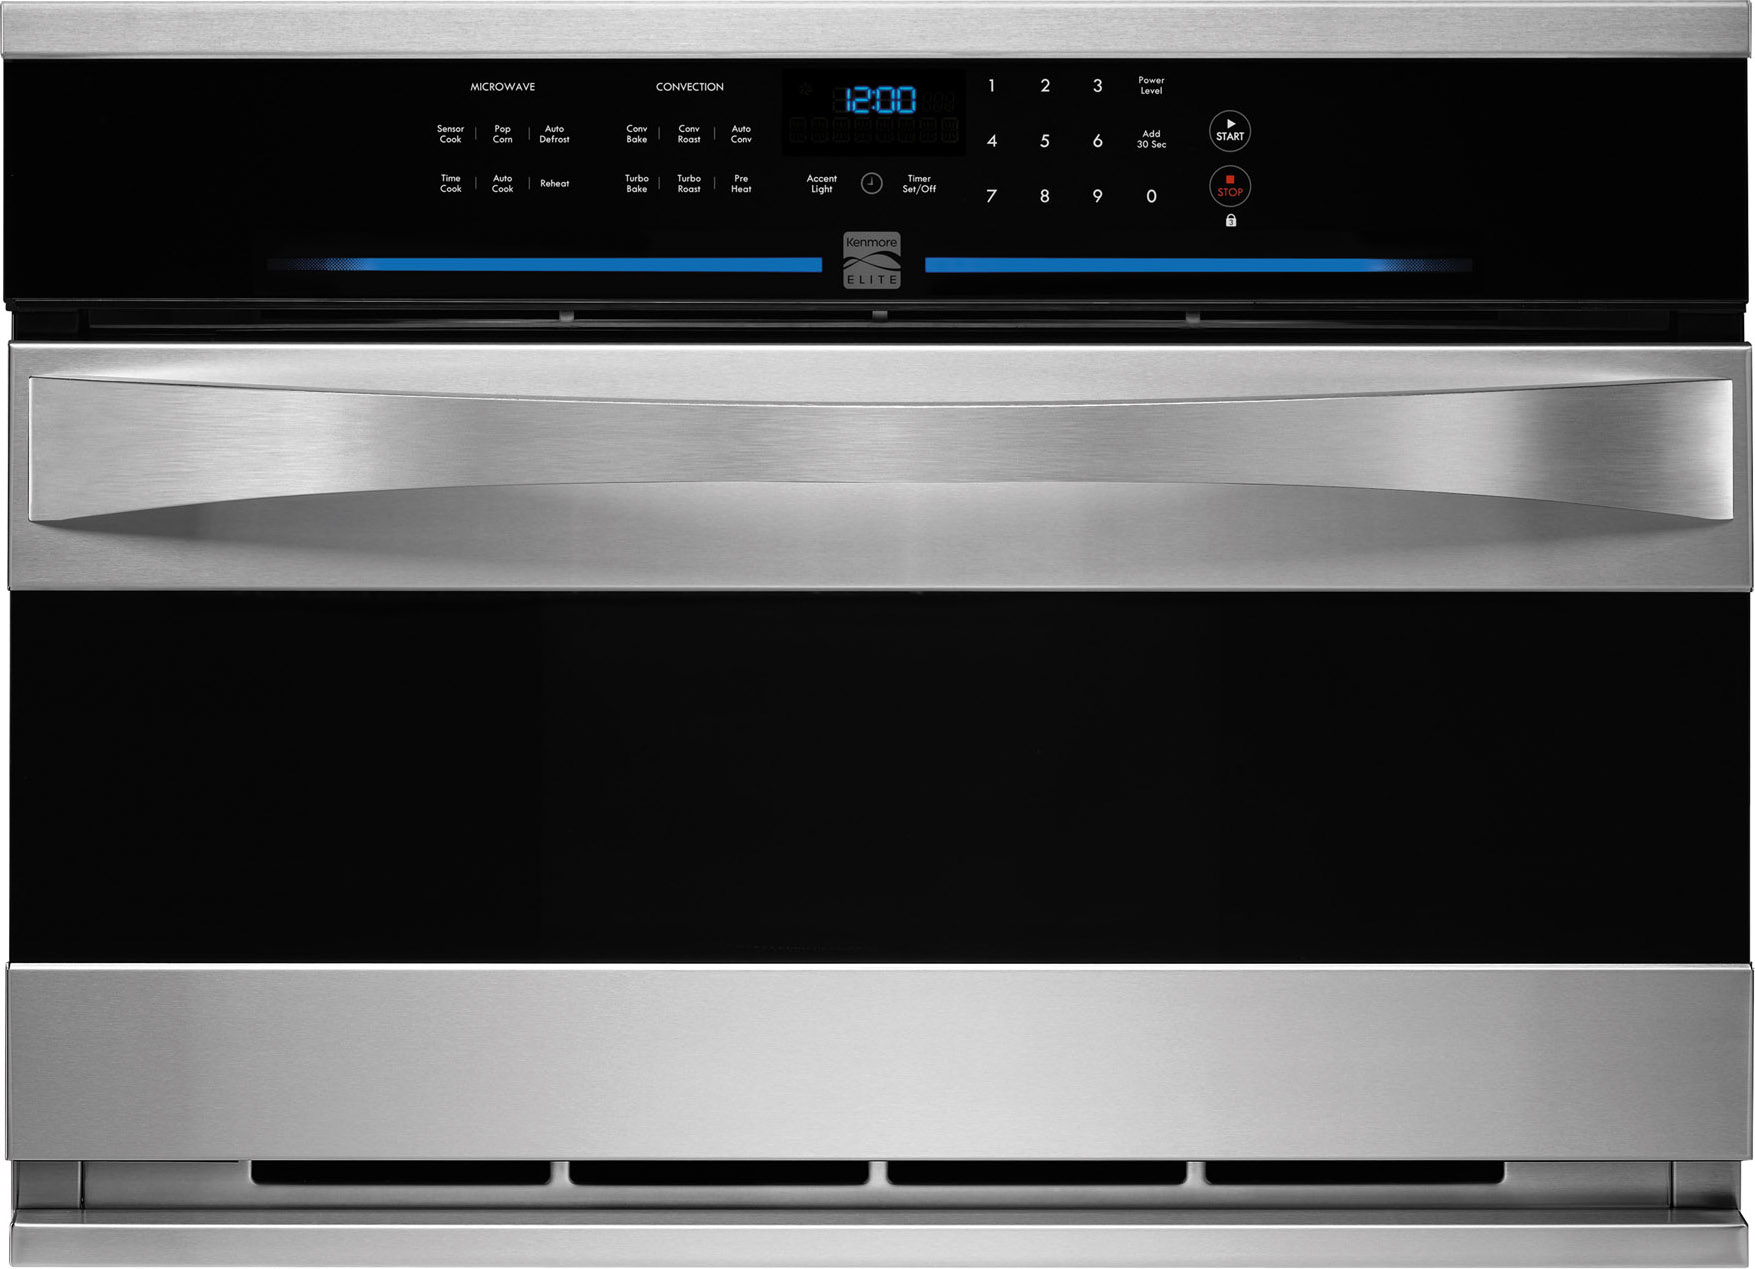 Kenmore Elite 48893 27" Built-in Convection Microwave - Stainless Steel